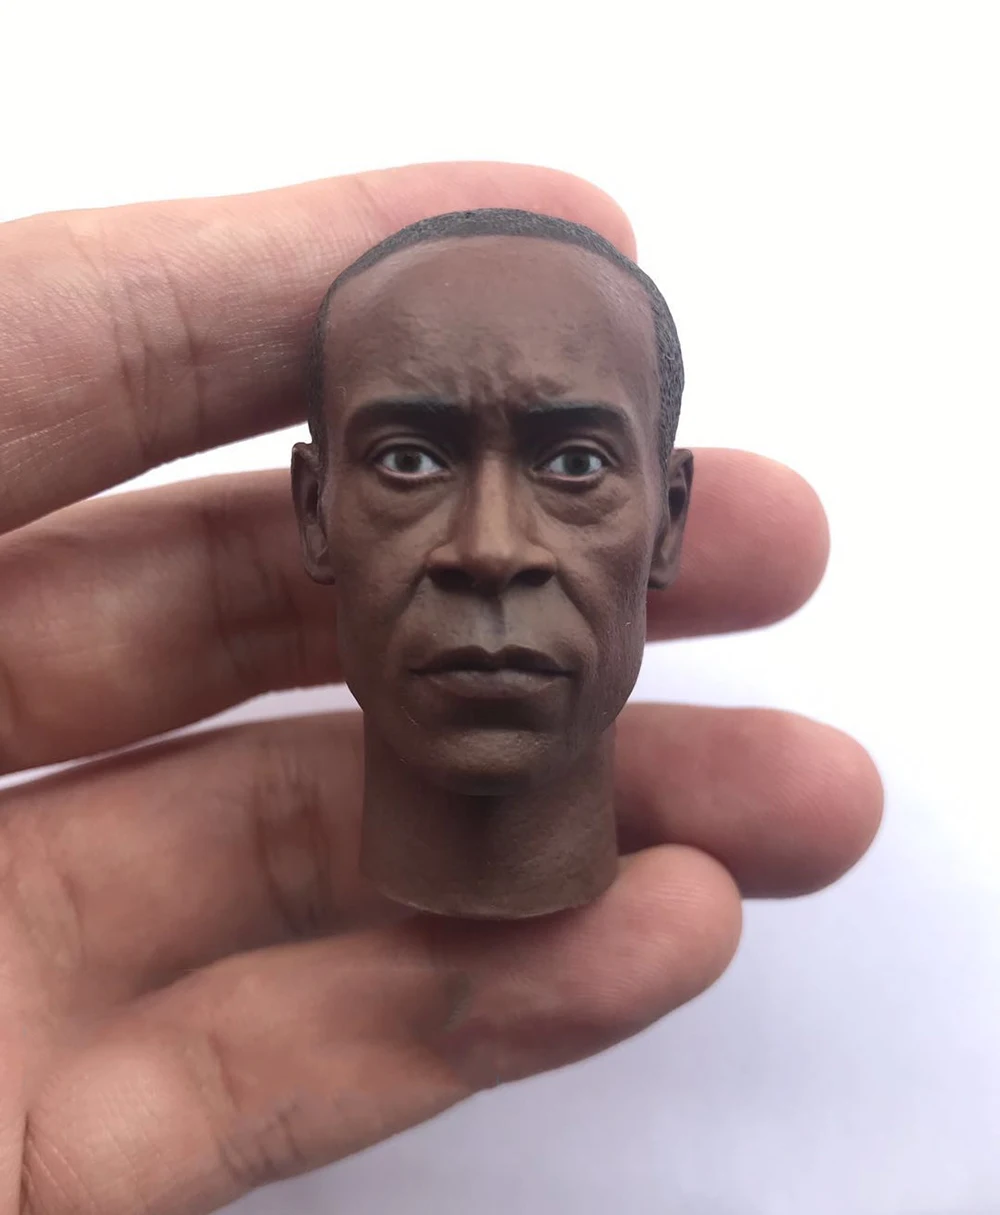 

For Sale 1/6 Gears of War Patriot The Black Don Cheadle Male Head Sculpture Carving Model For 12inch Action Figure For Collect